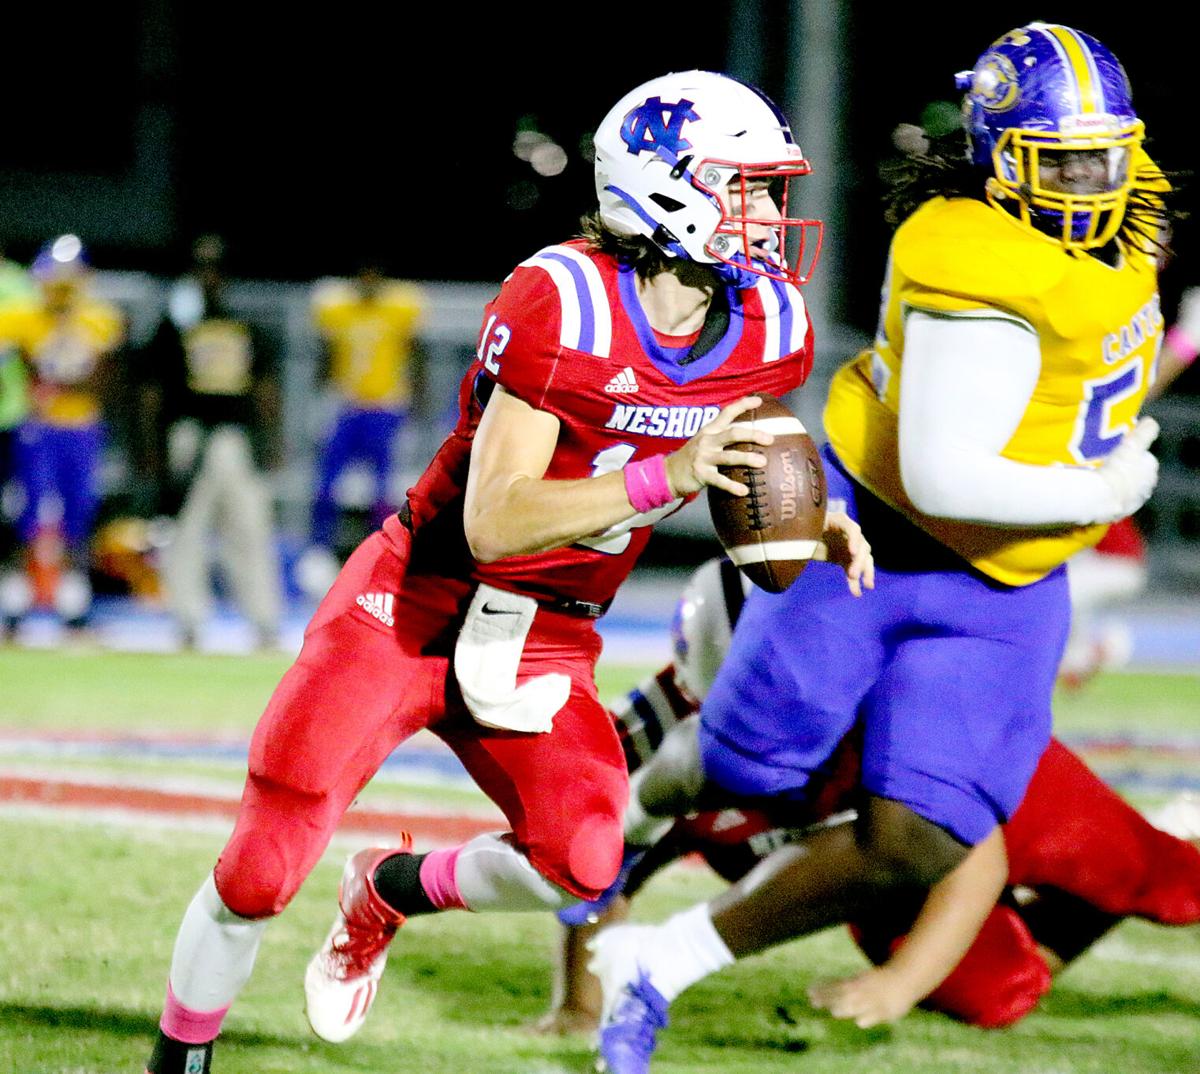 roundups-and-scores-thursday-oct-8-2020-neshoba-central-beats-canton-on-homecoming